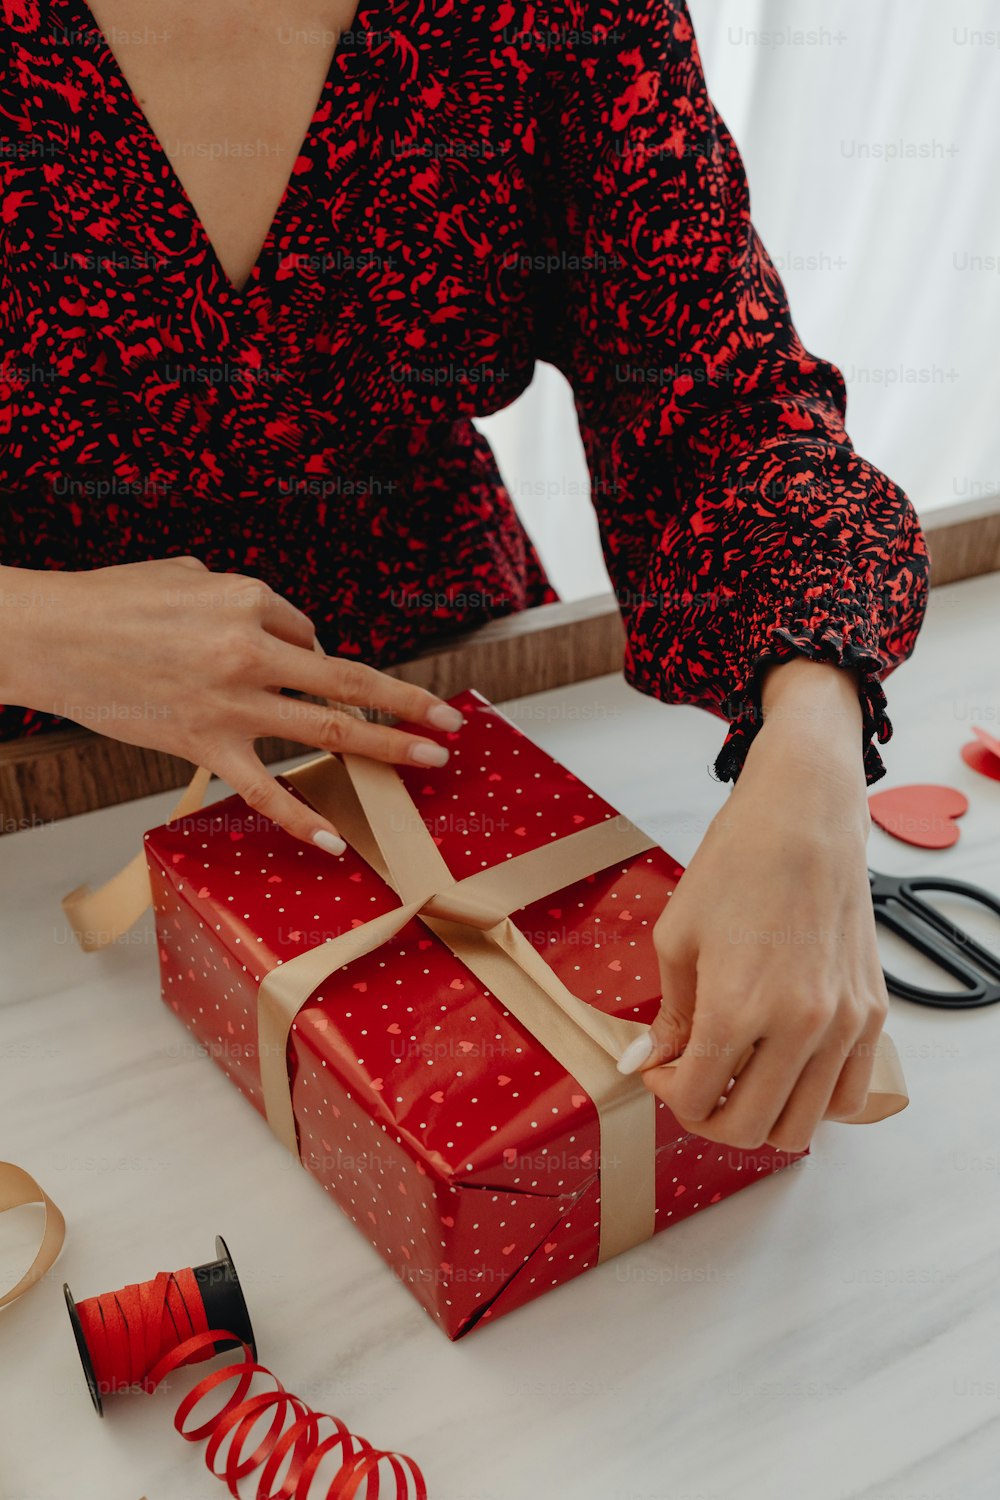 a woman is wrapping a red gift box